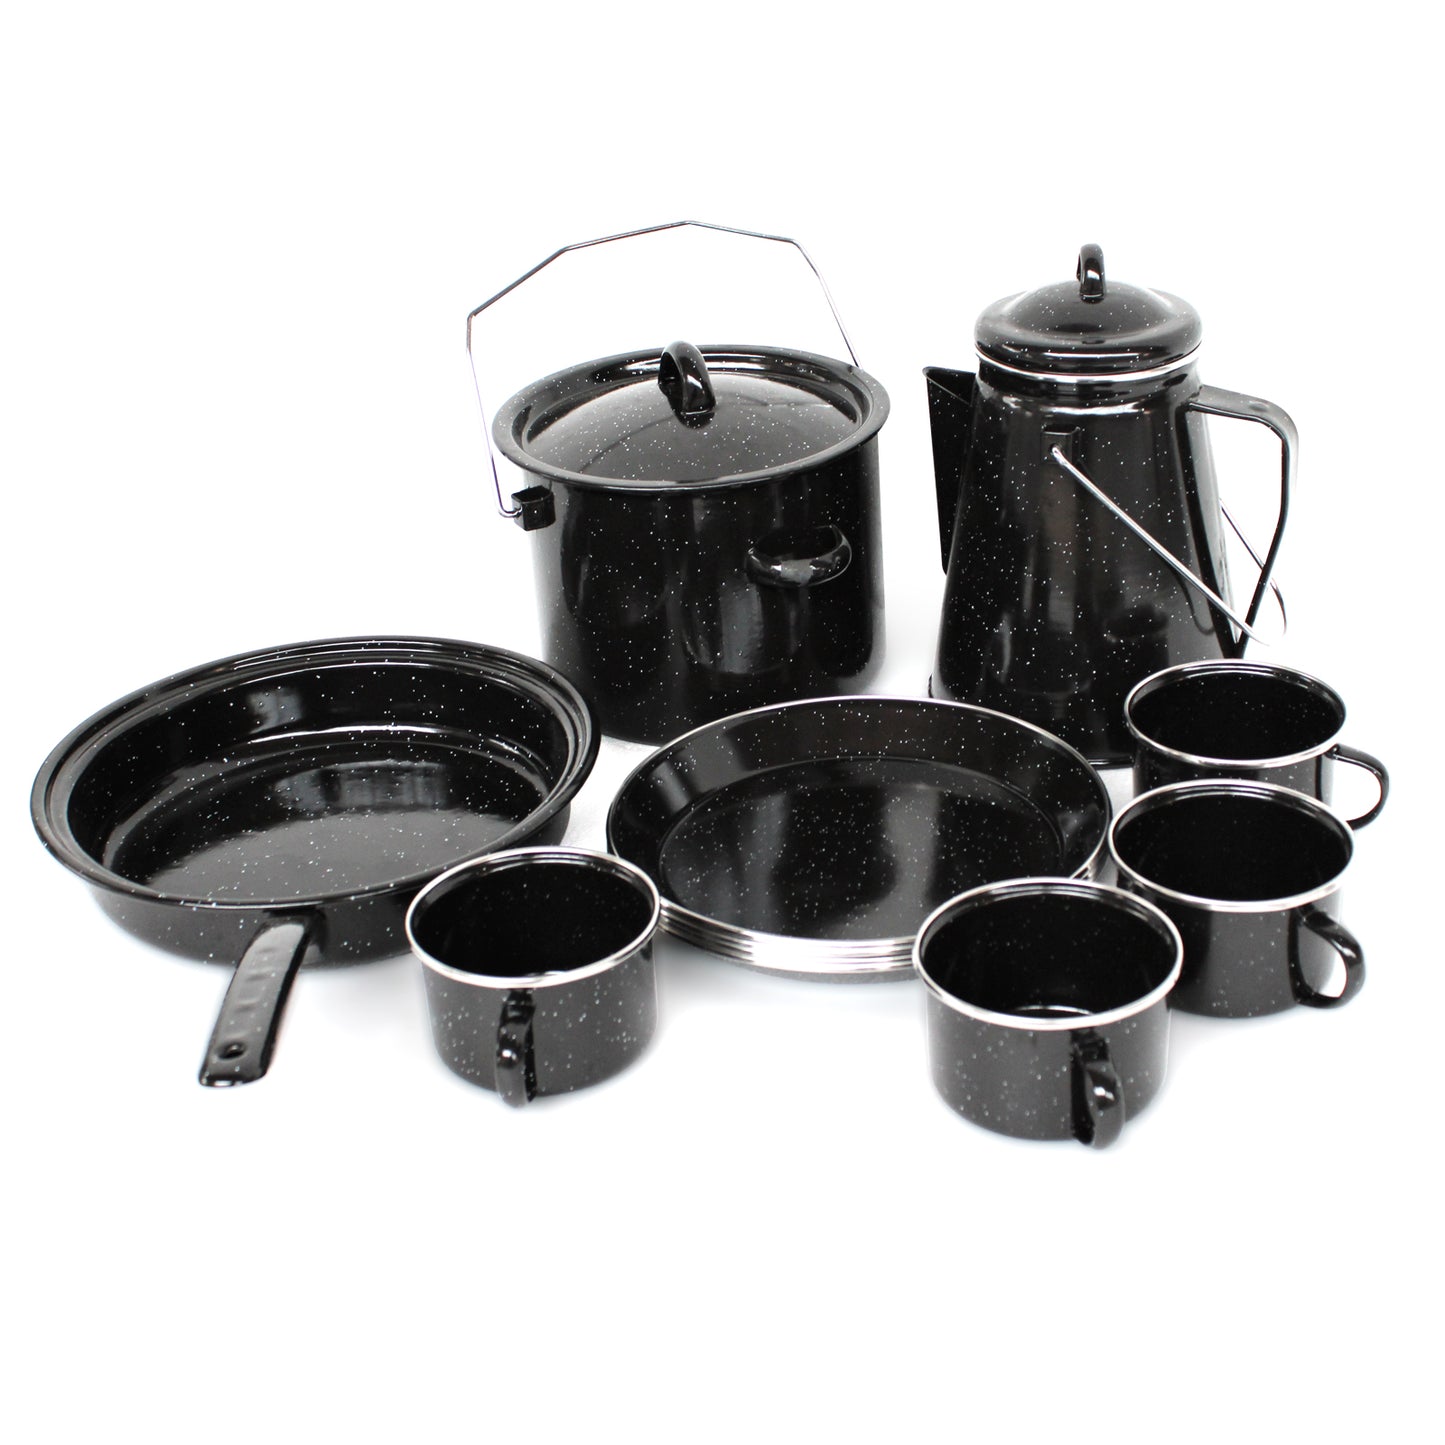 11pc camping set with kettle, pans, pots, plates and cups